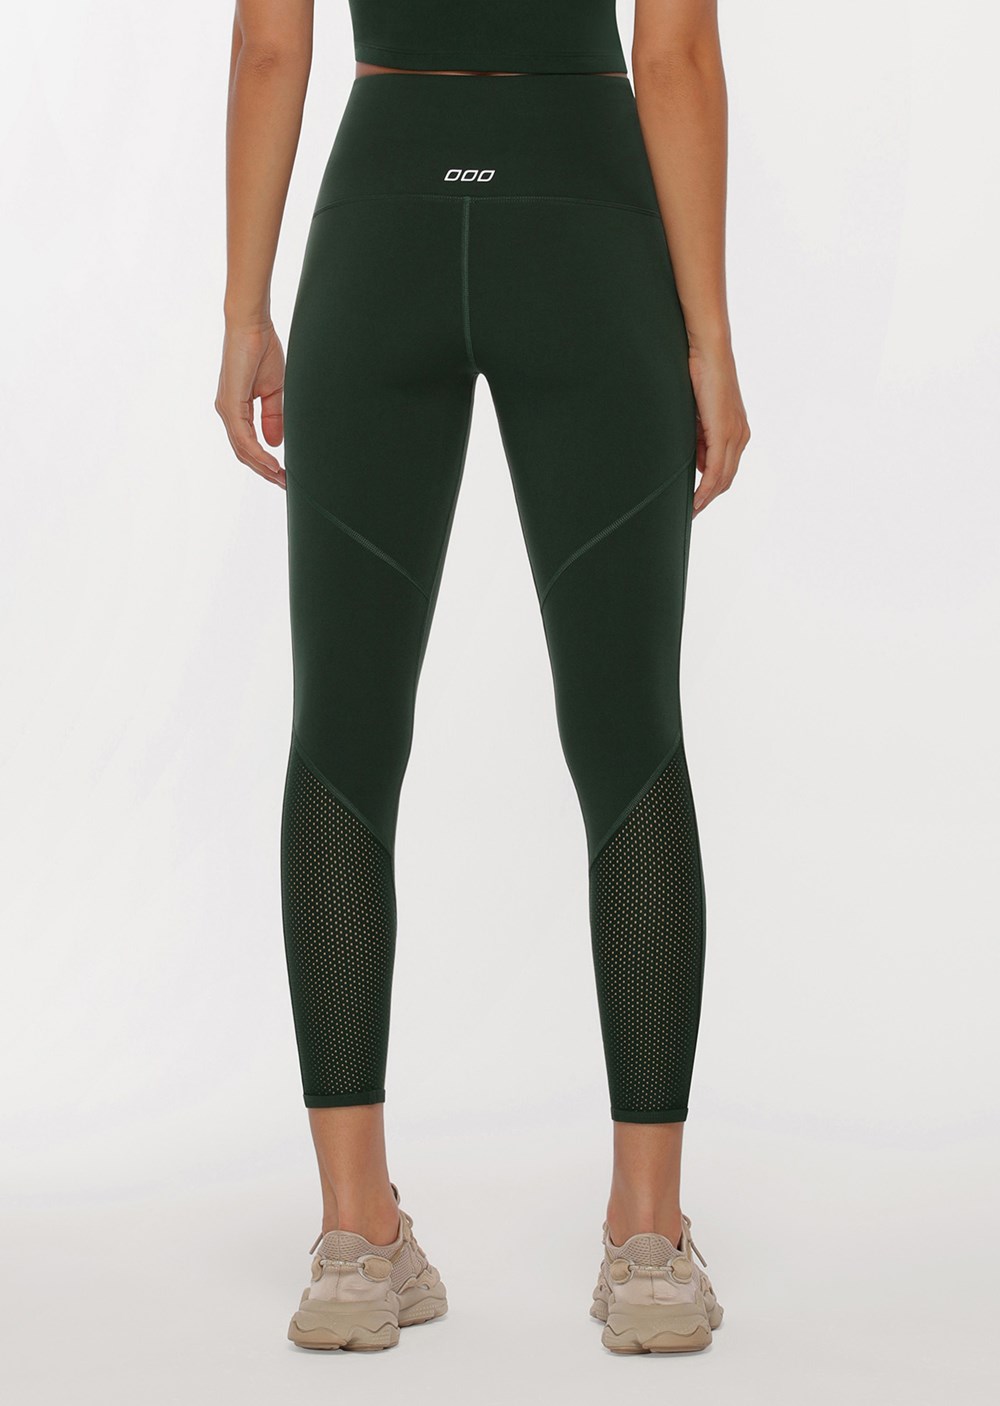 Lorna Jane All Day Booty Ankle Biter Tights - AirRobe